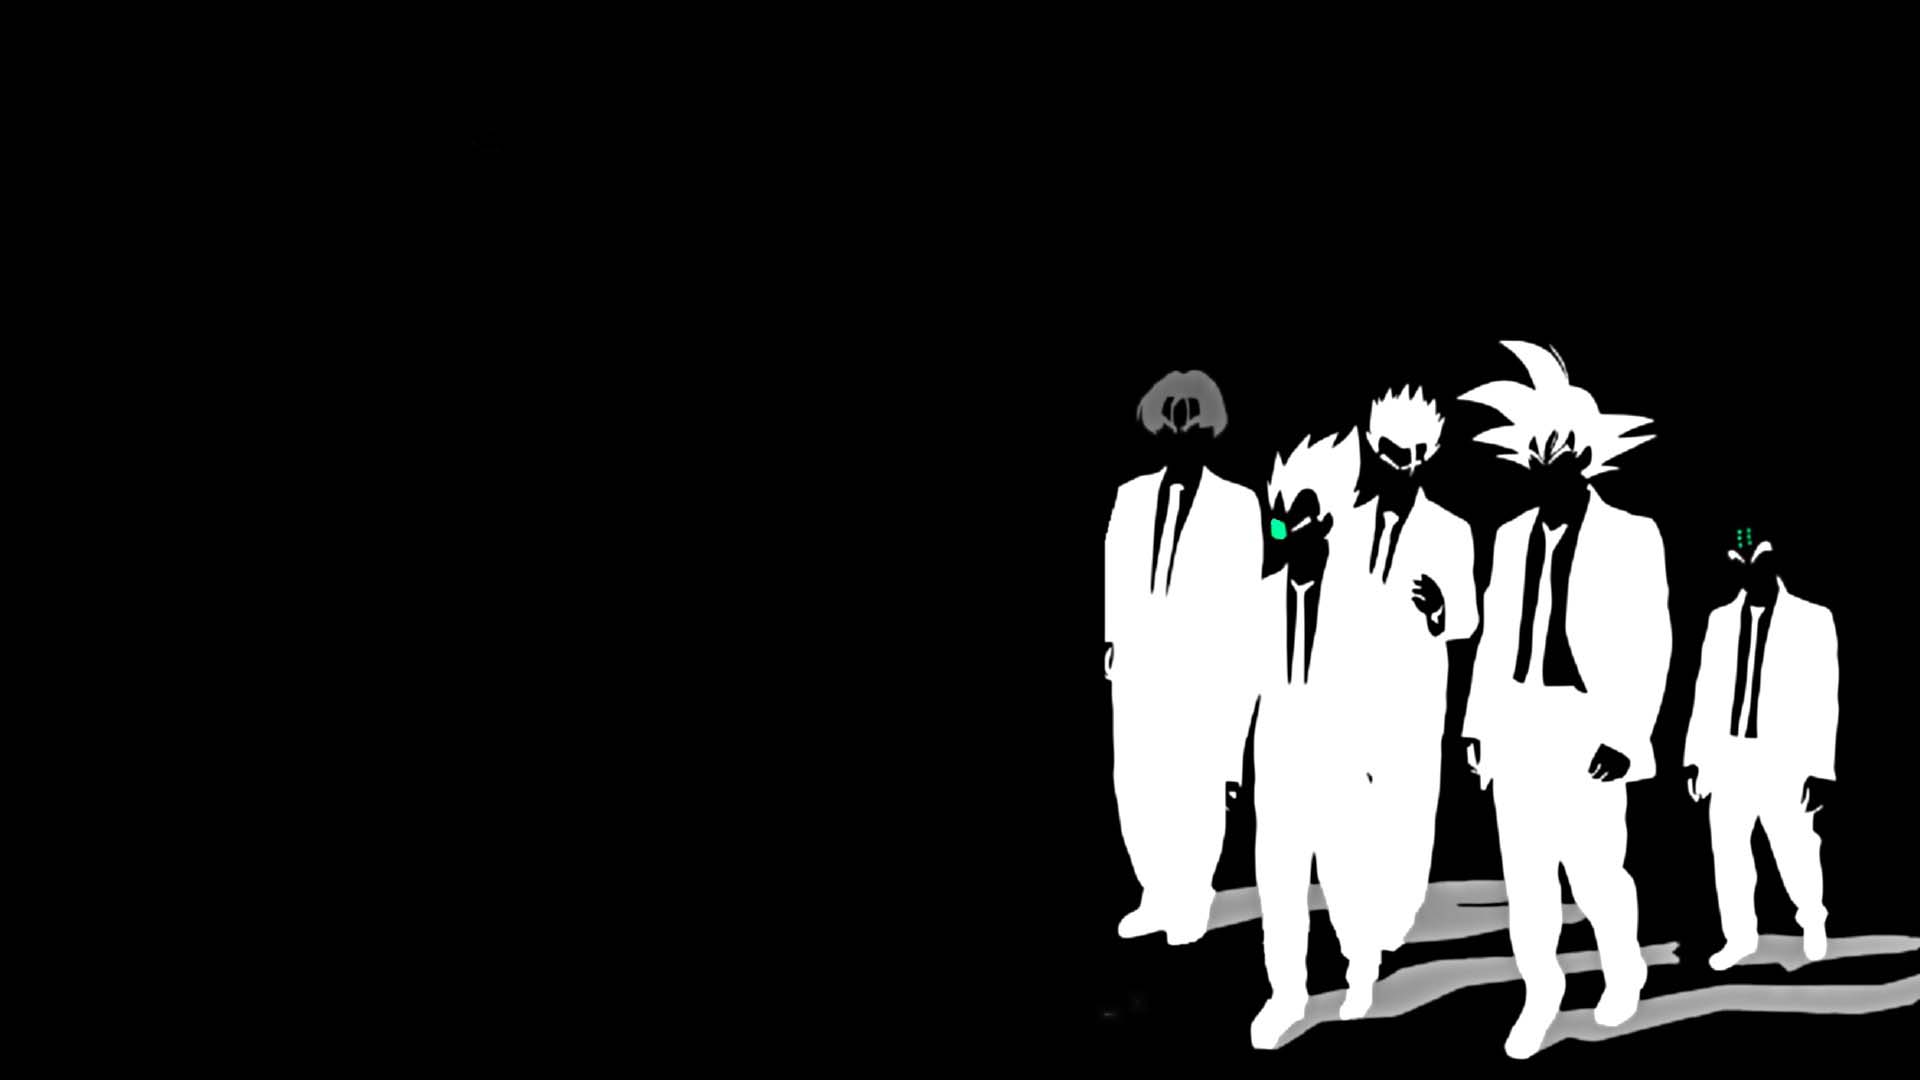 Dbz Characters In Suits Silhouette HD Wallpaper 1920x1080 ID49201